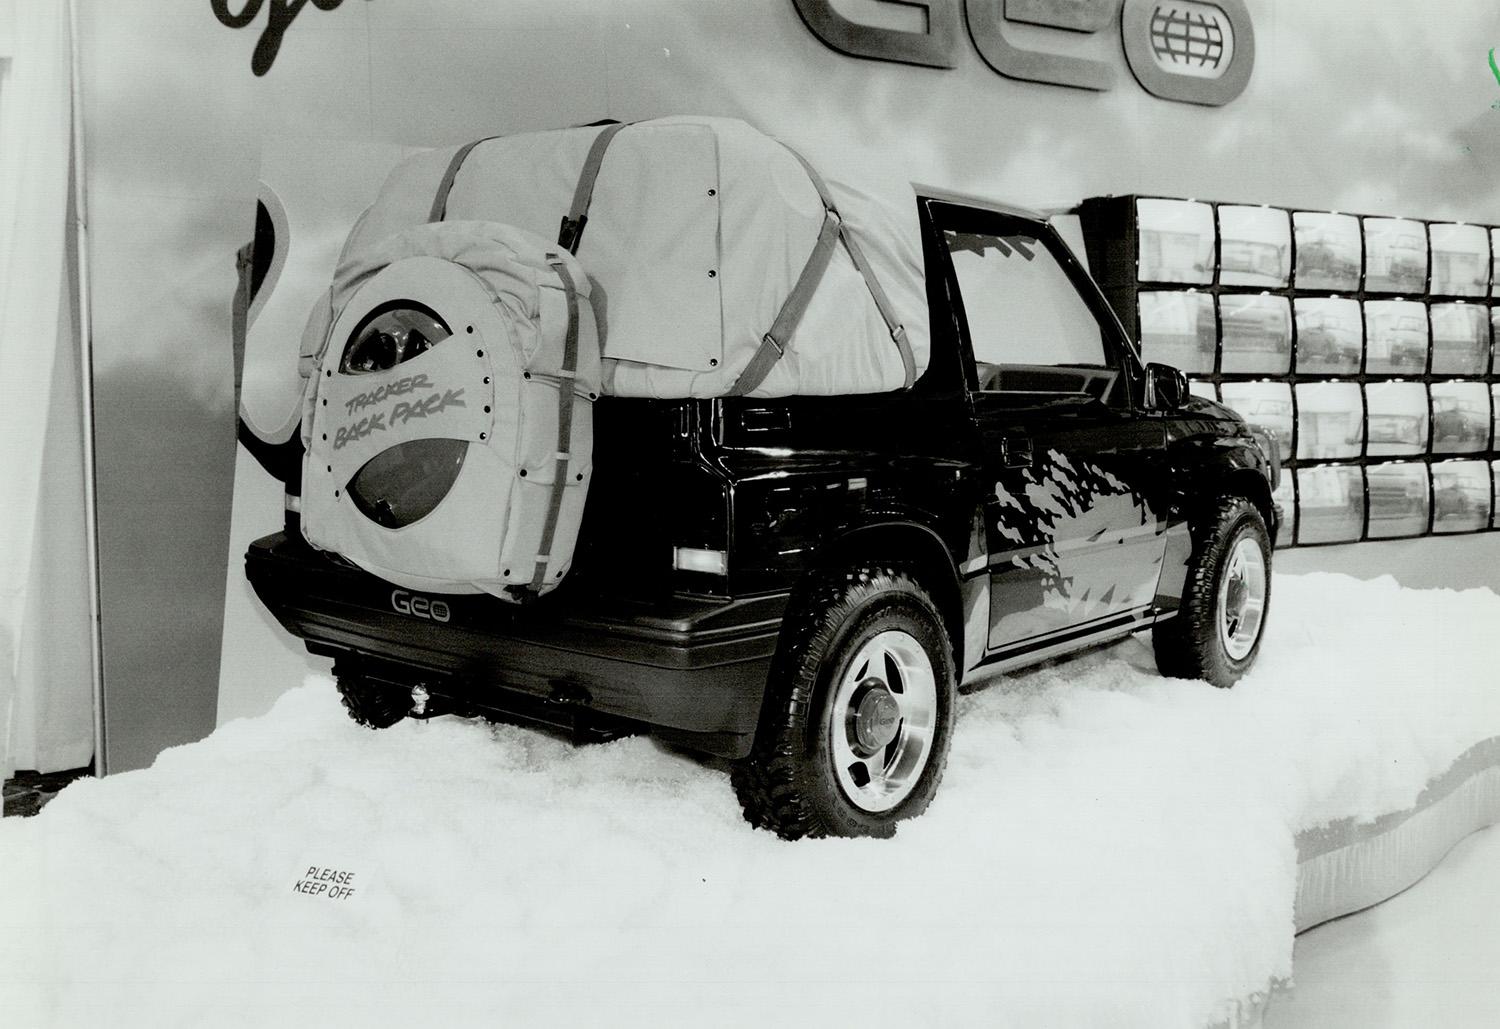 Geo Tracker black and white photo in snow with Tracker backpack accesory